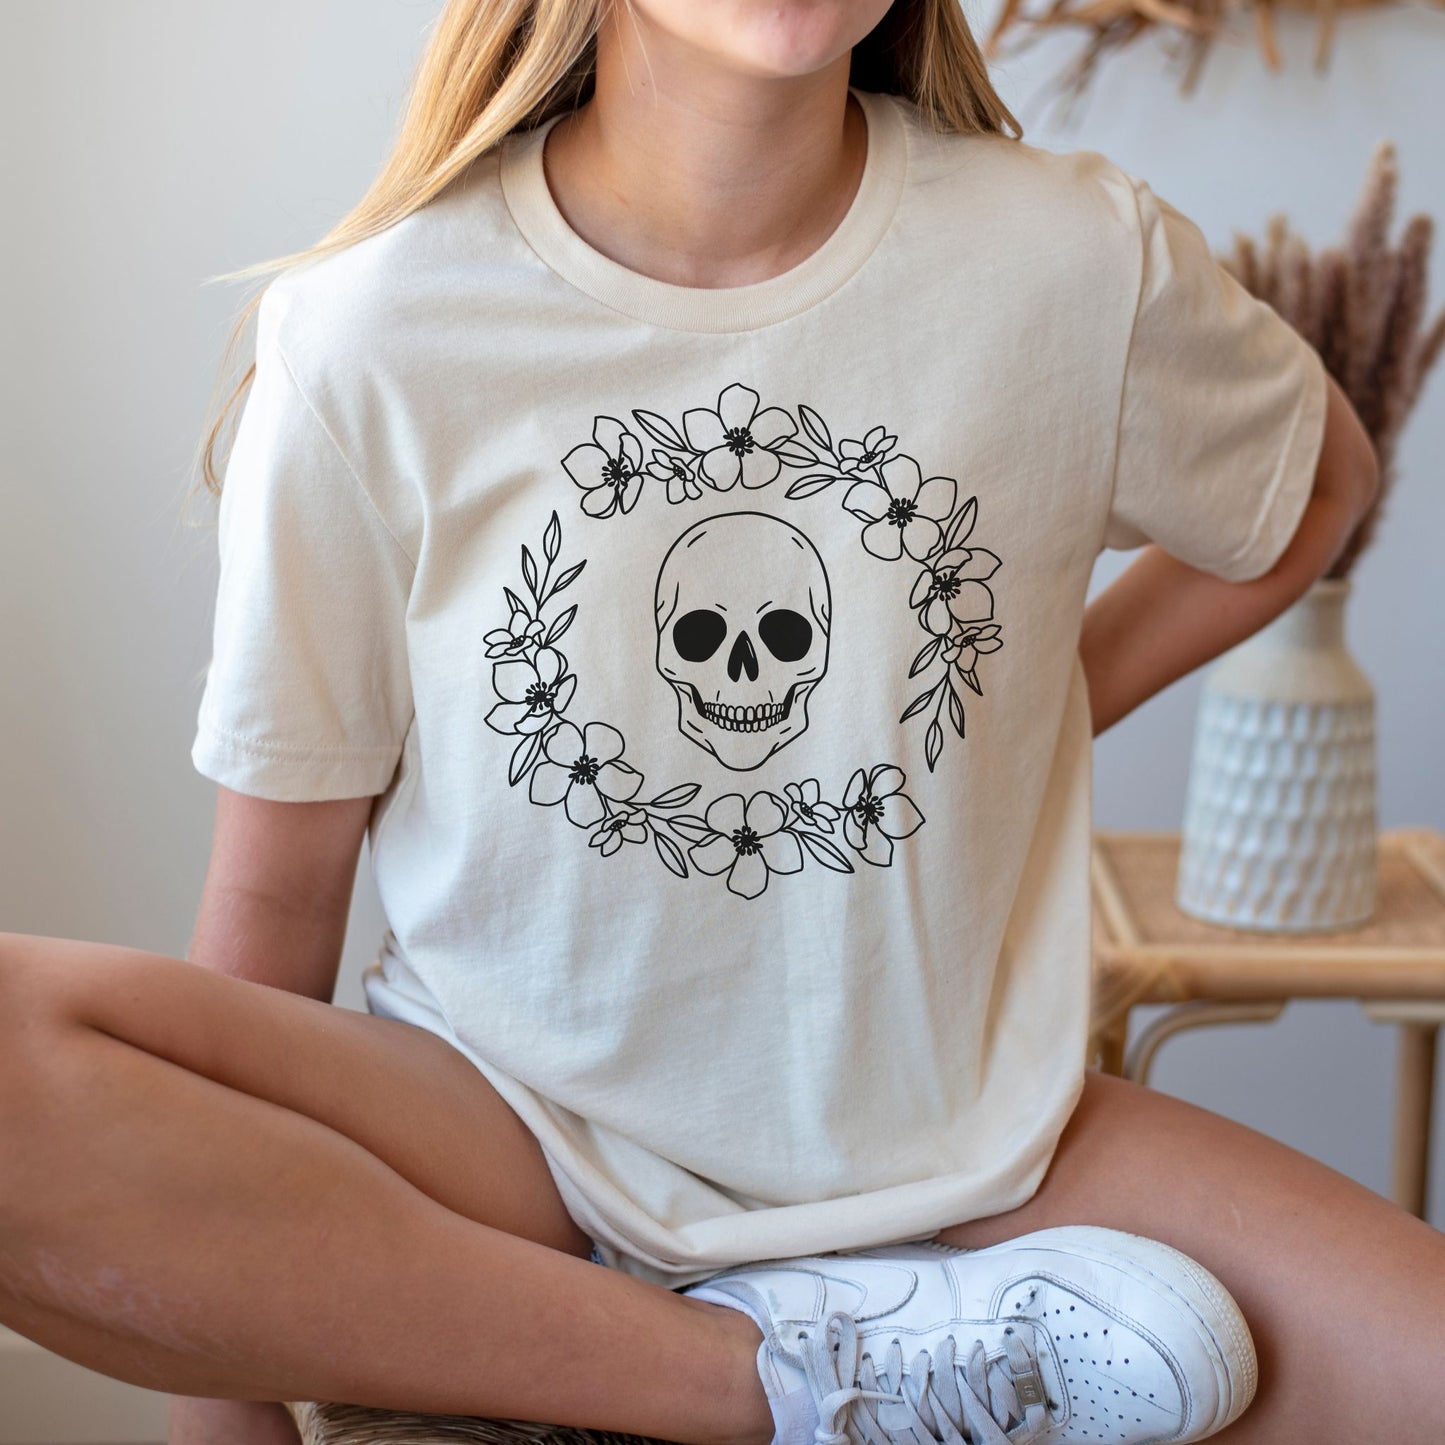 Blossom Skull Wreath Graphic Tee in Natural